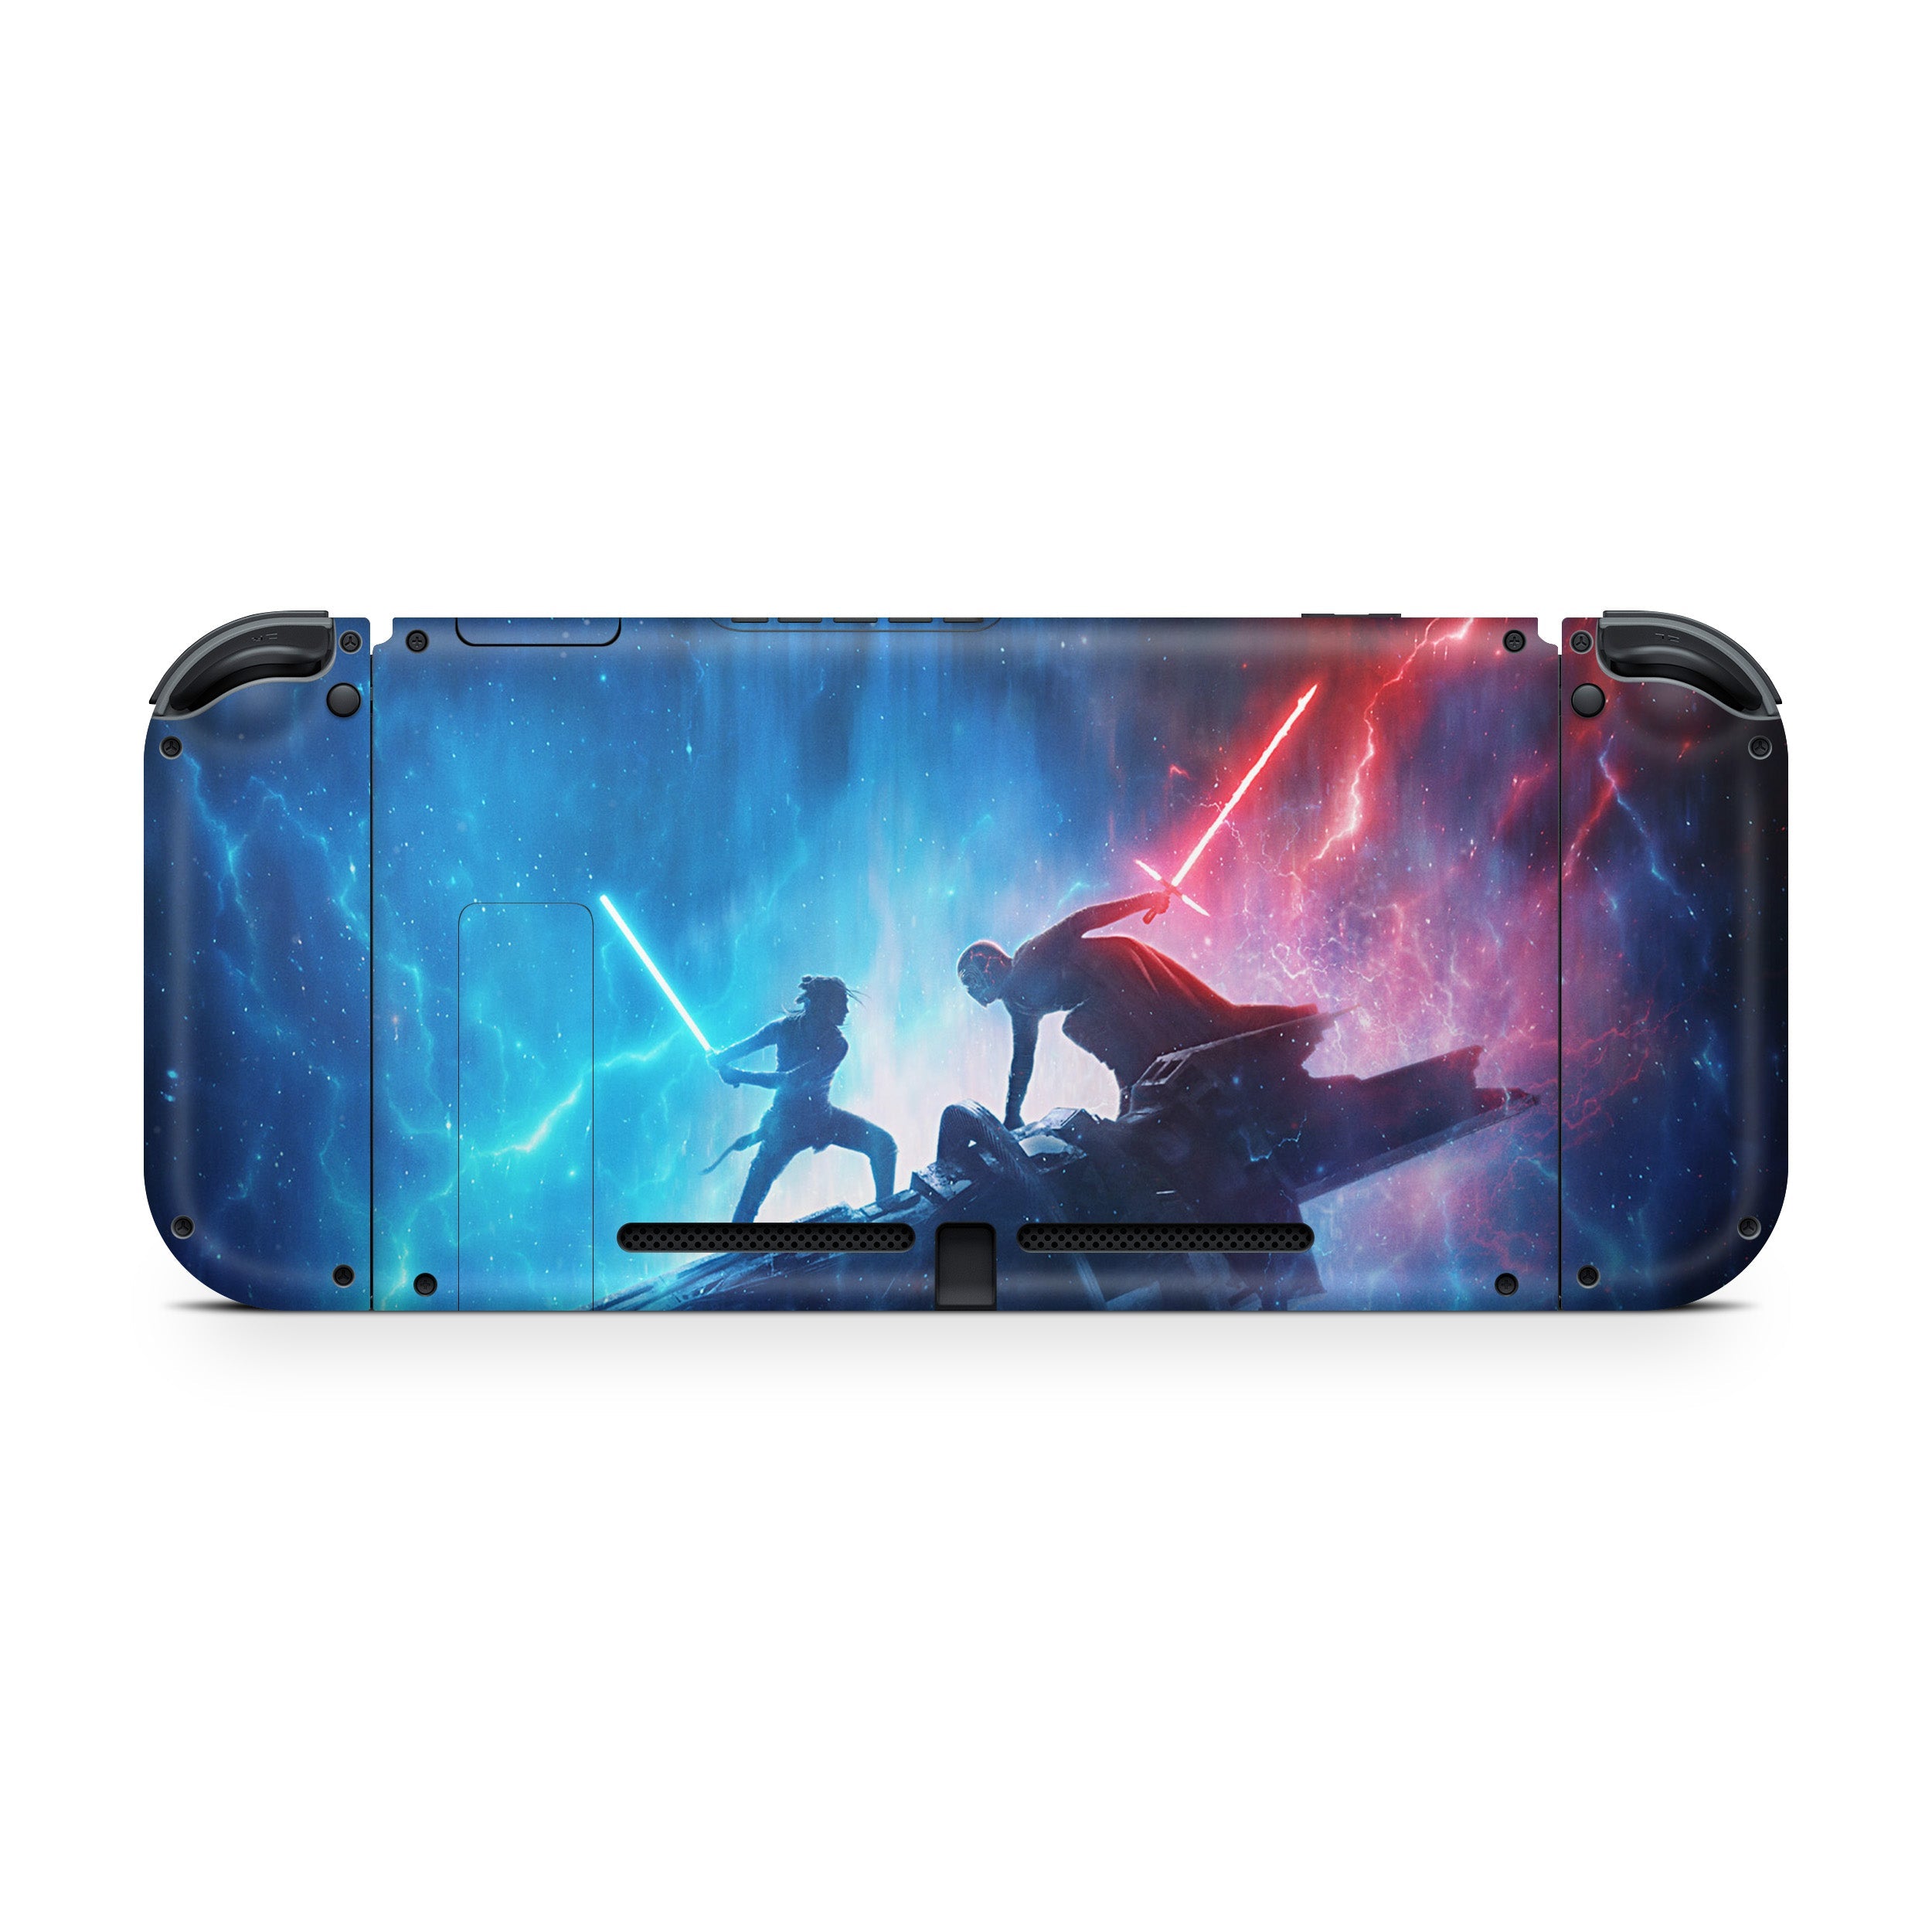 A video game skin featuring a Star Wars The Rise of Skywalker design for the Nintendo Switch.